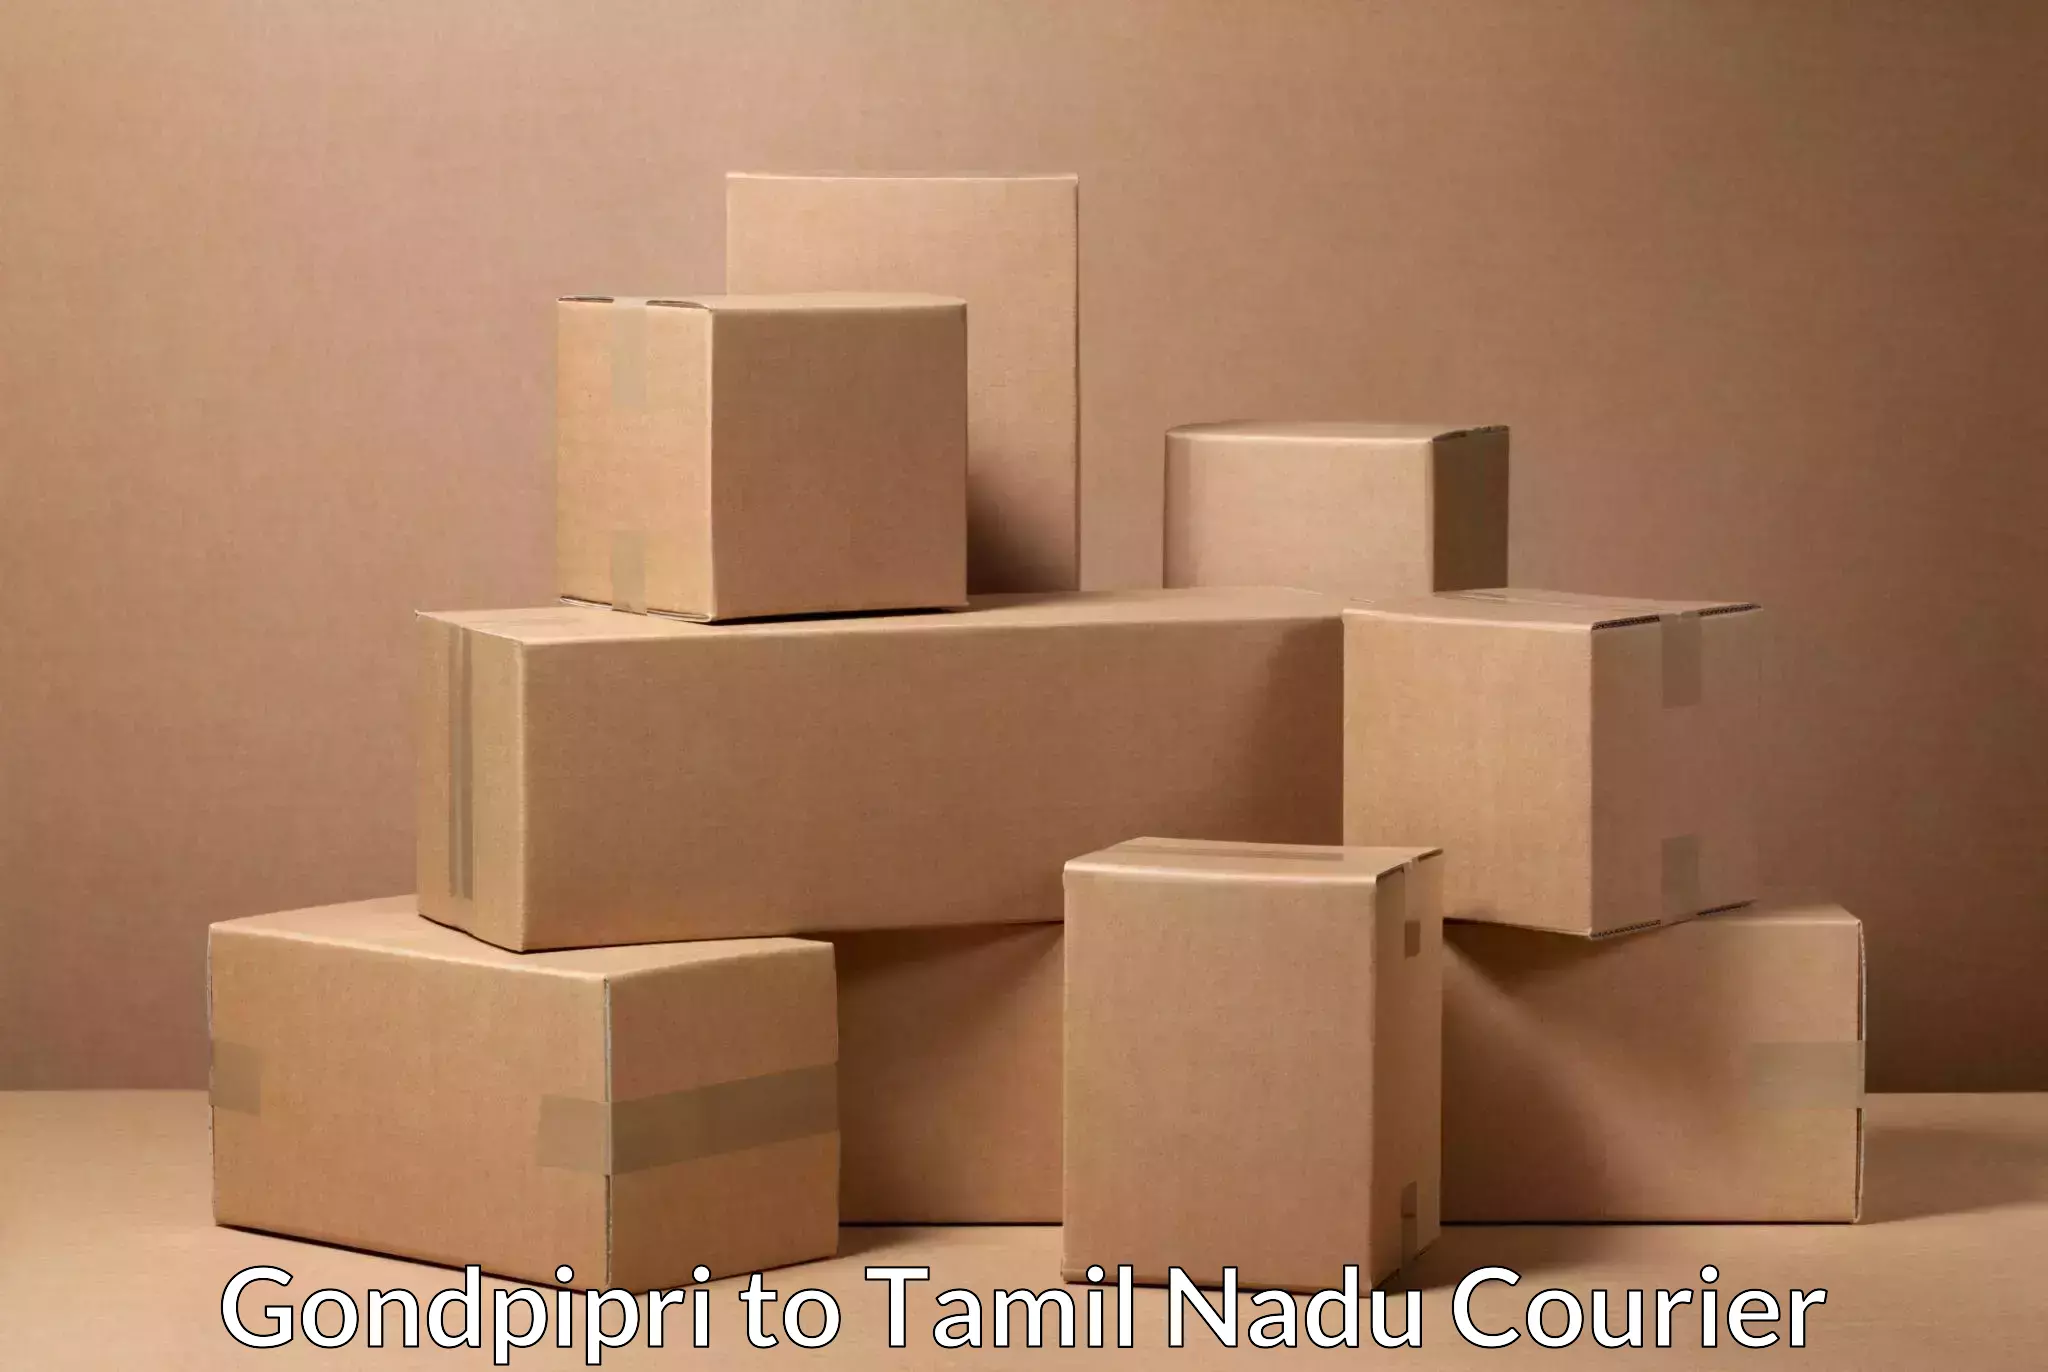 Corporate courier solutions Gondpipri to Coonoor